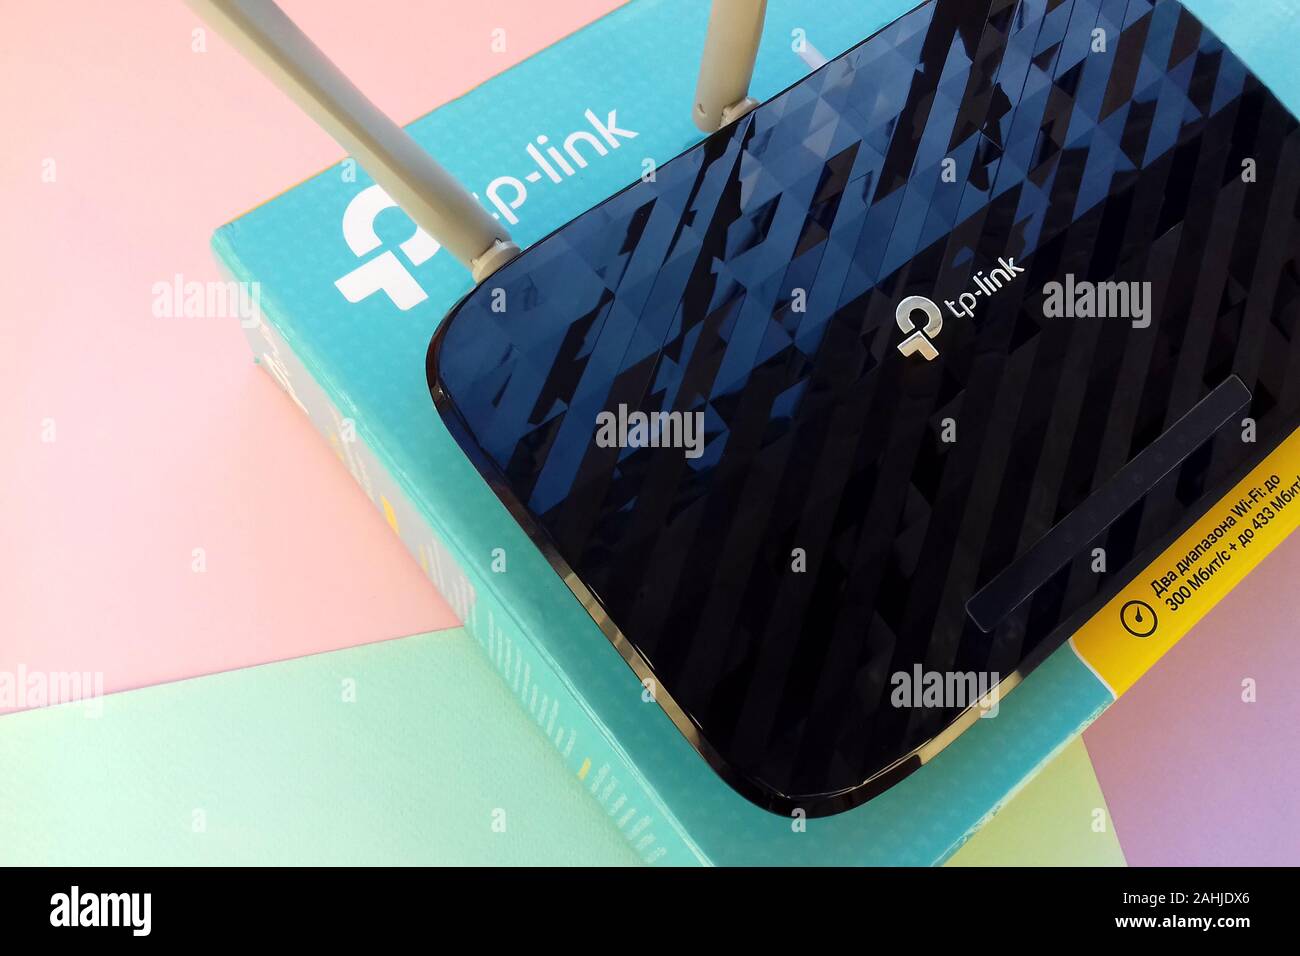 NY, USA - NOVEMBER 24, 2019: Wireless router modem tp link Archer C20 AC750  and colored cardboard box with tp-link logo Stock Photo - Alamy